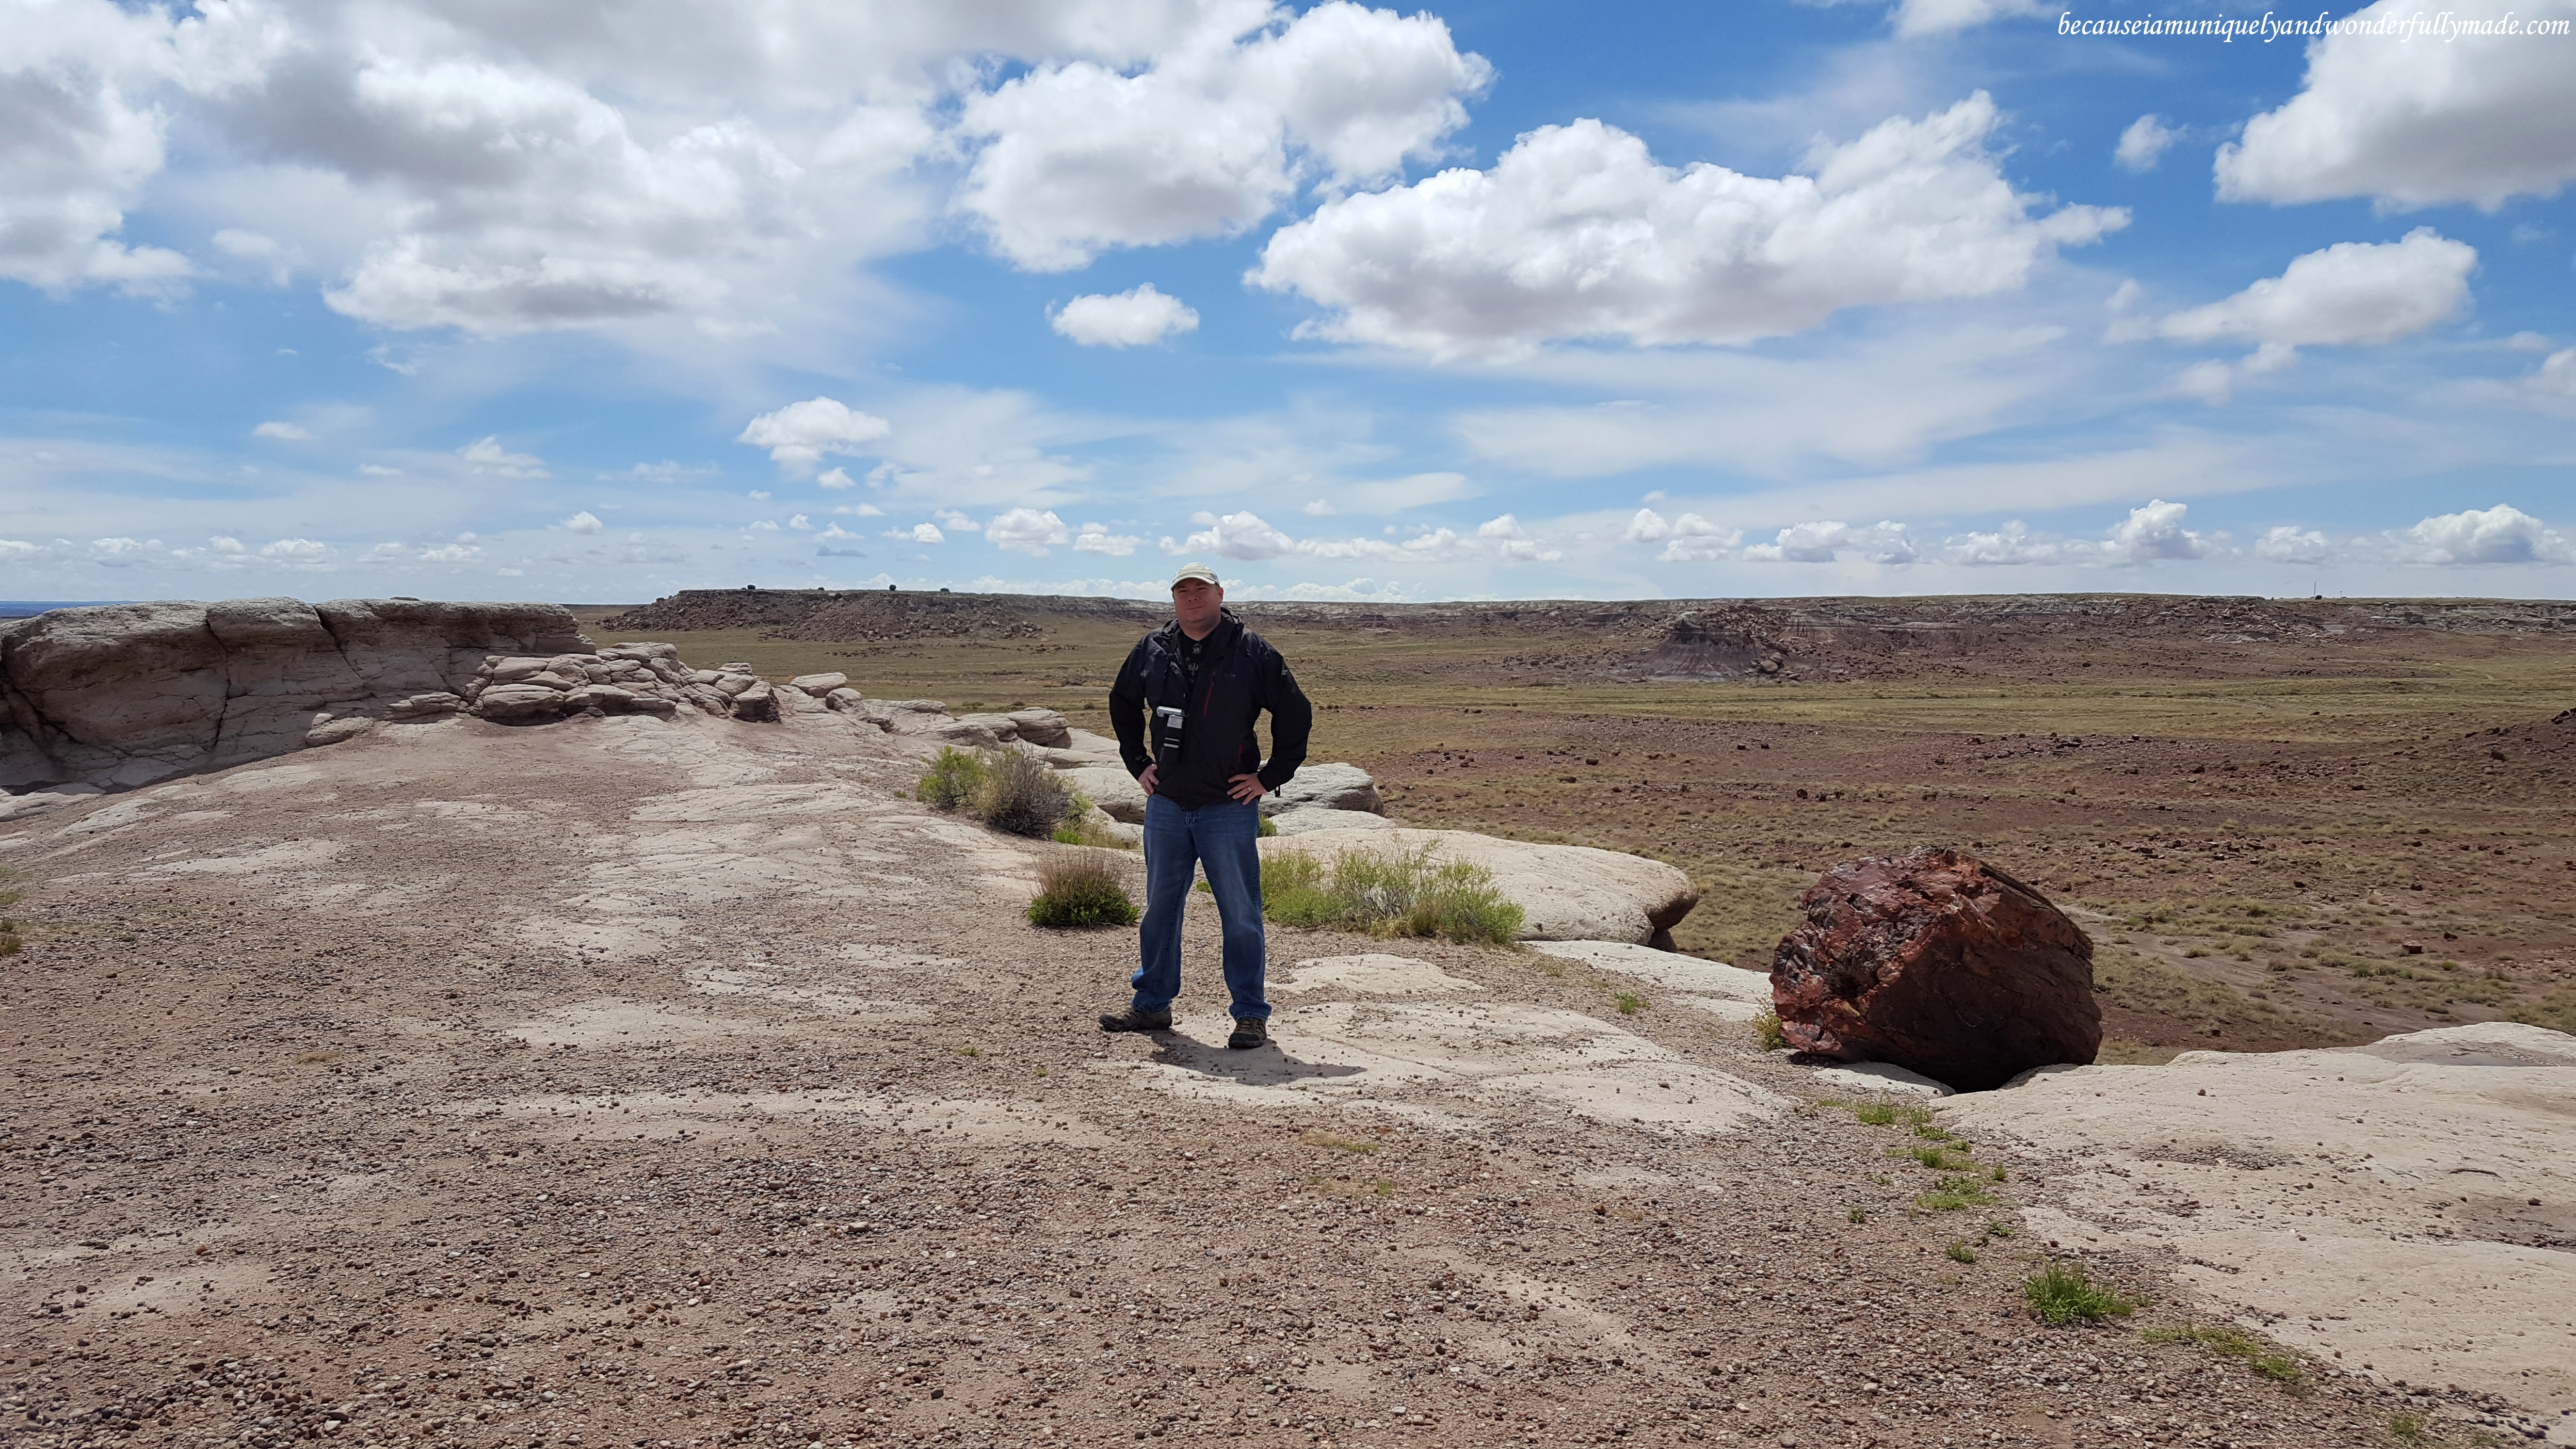 Petrified Forest National Park covers about 230 square miles making it an adventure to scout for petrified specimens.